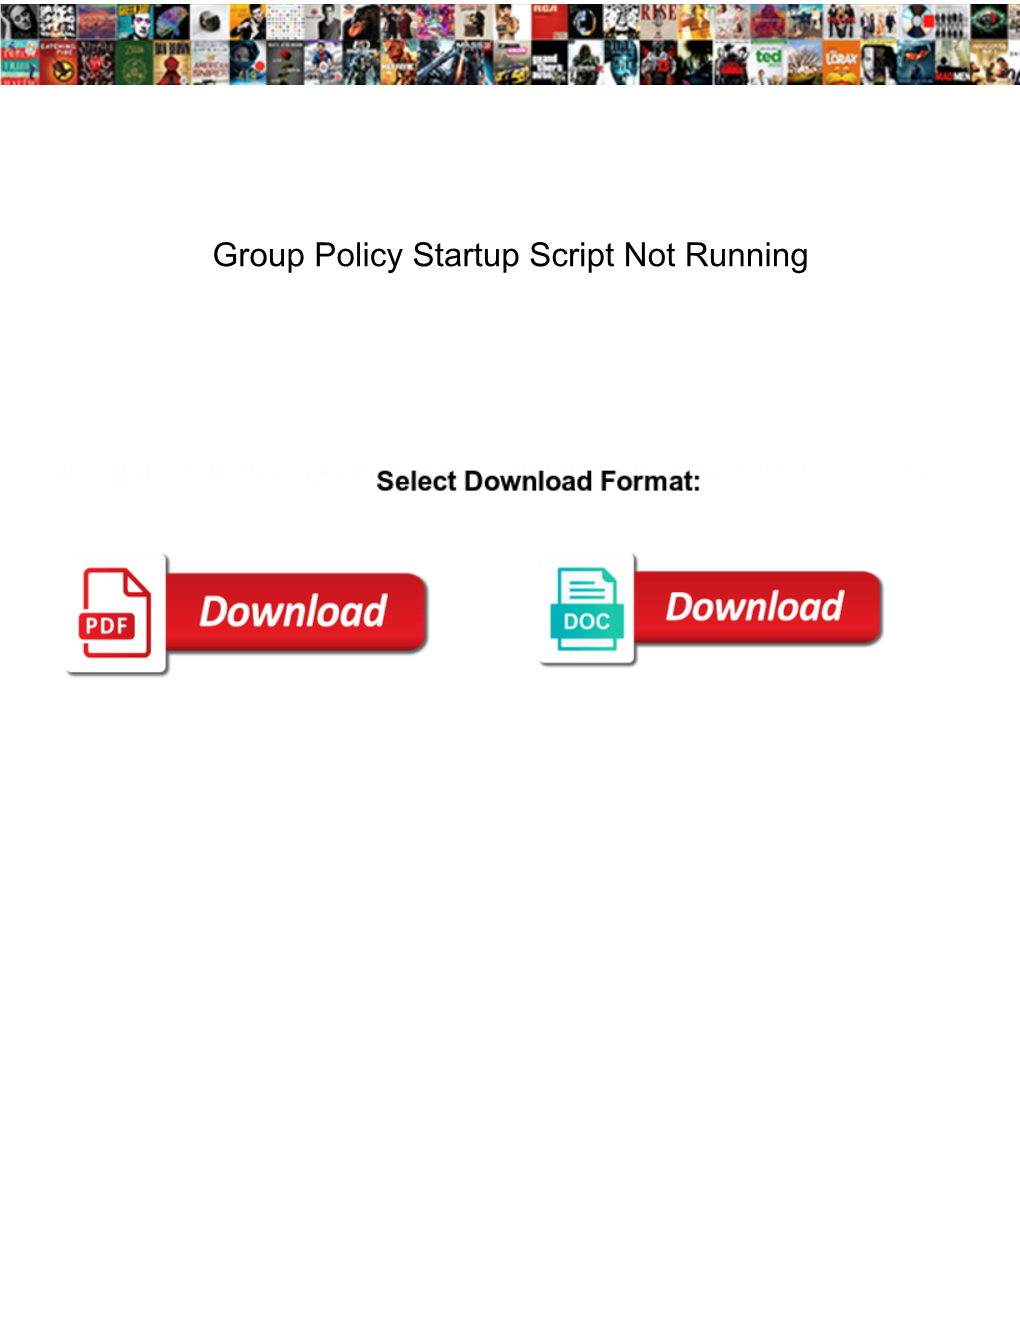 Group Policy Startup Script Not Running